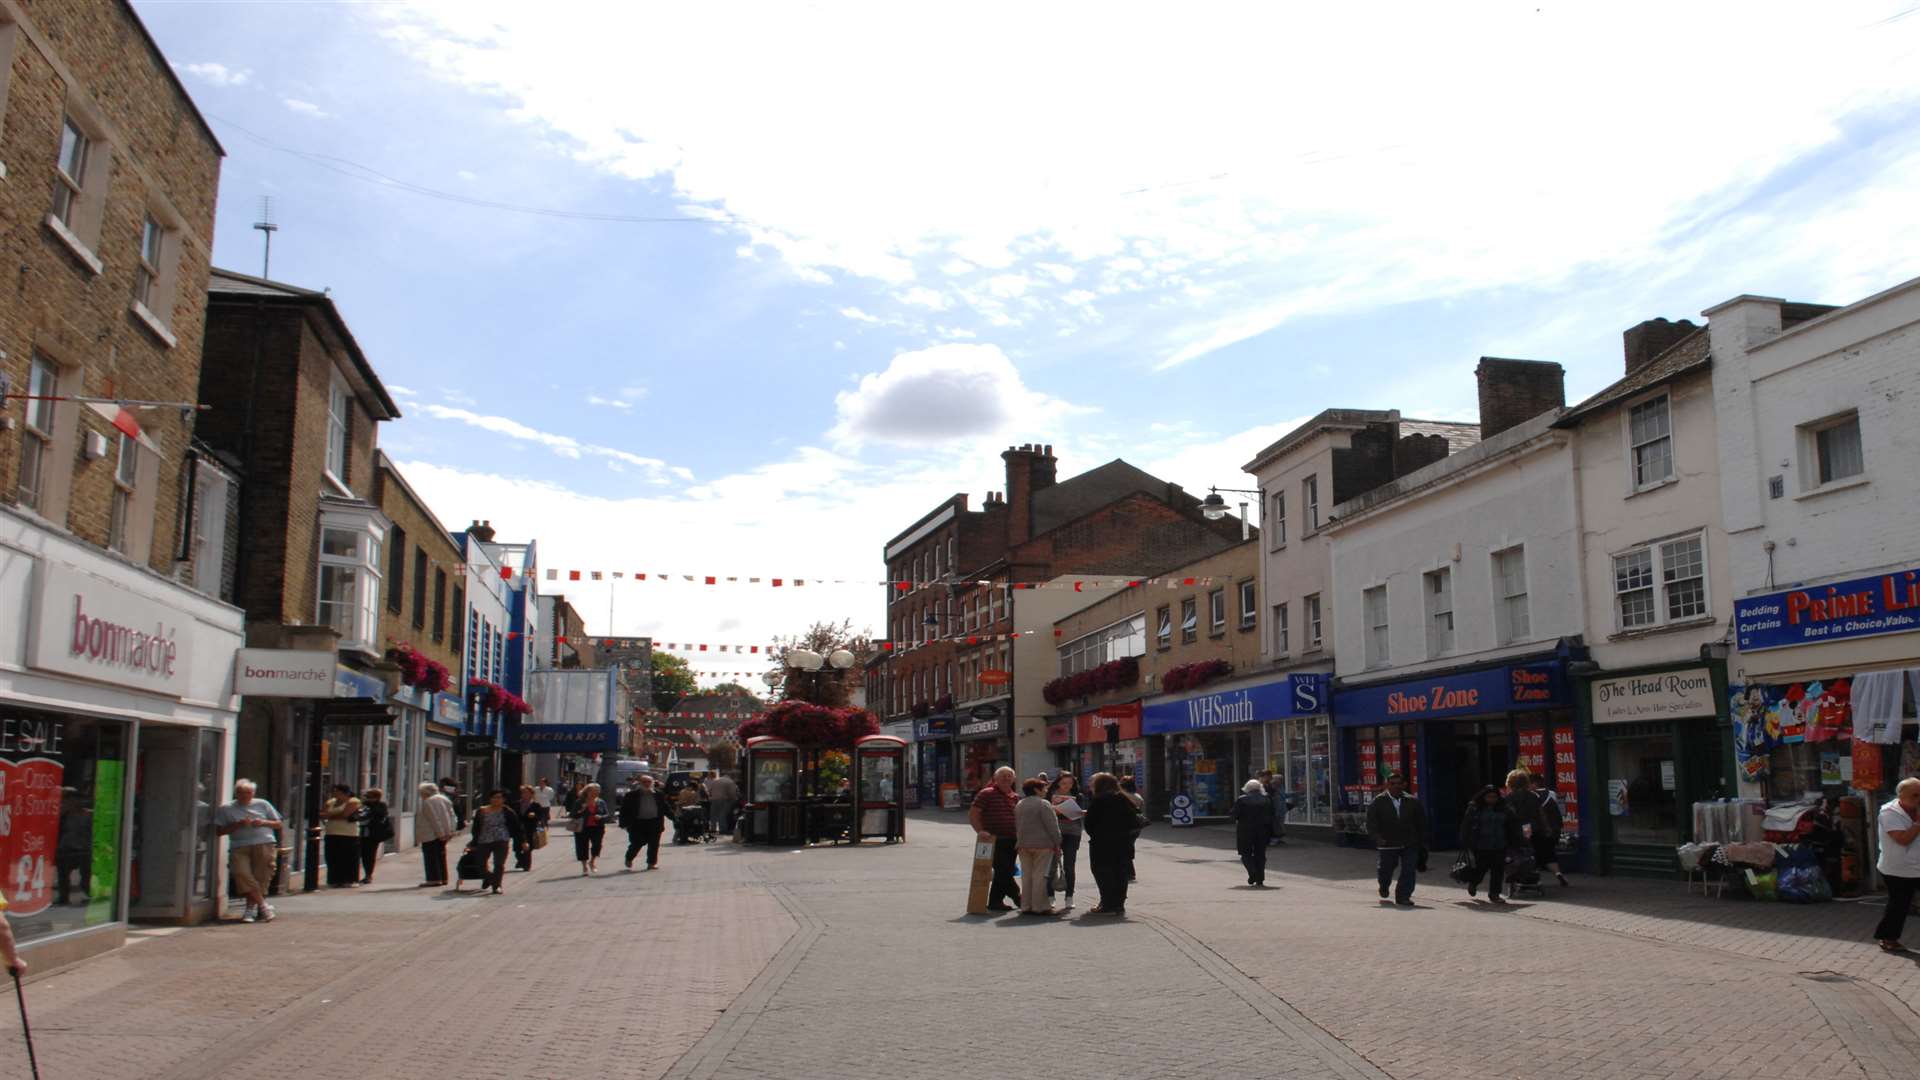 A Public Spaces Protection Order (PSPO), created by Dartford Borough Council, has come into force to tackle street drinking and anti-social behaviour in Dartford